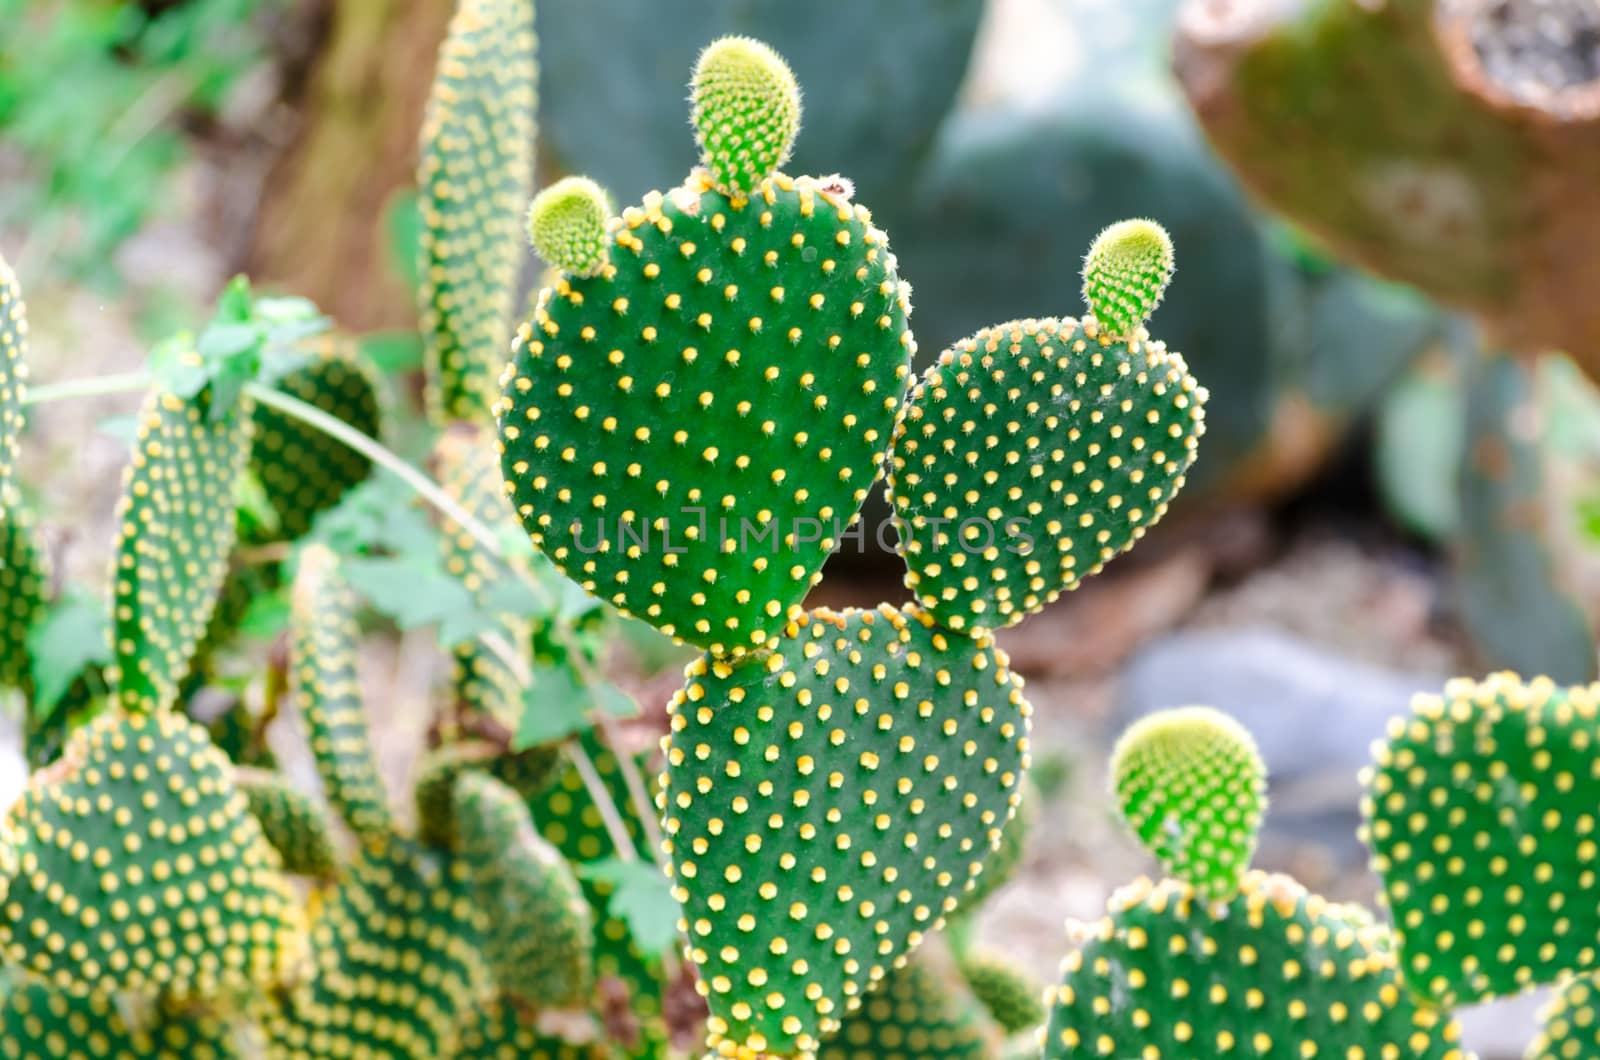 Cactus of the genus Opuntia,  is species-rich and particularly widespread far.